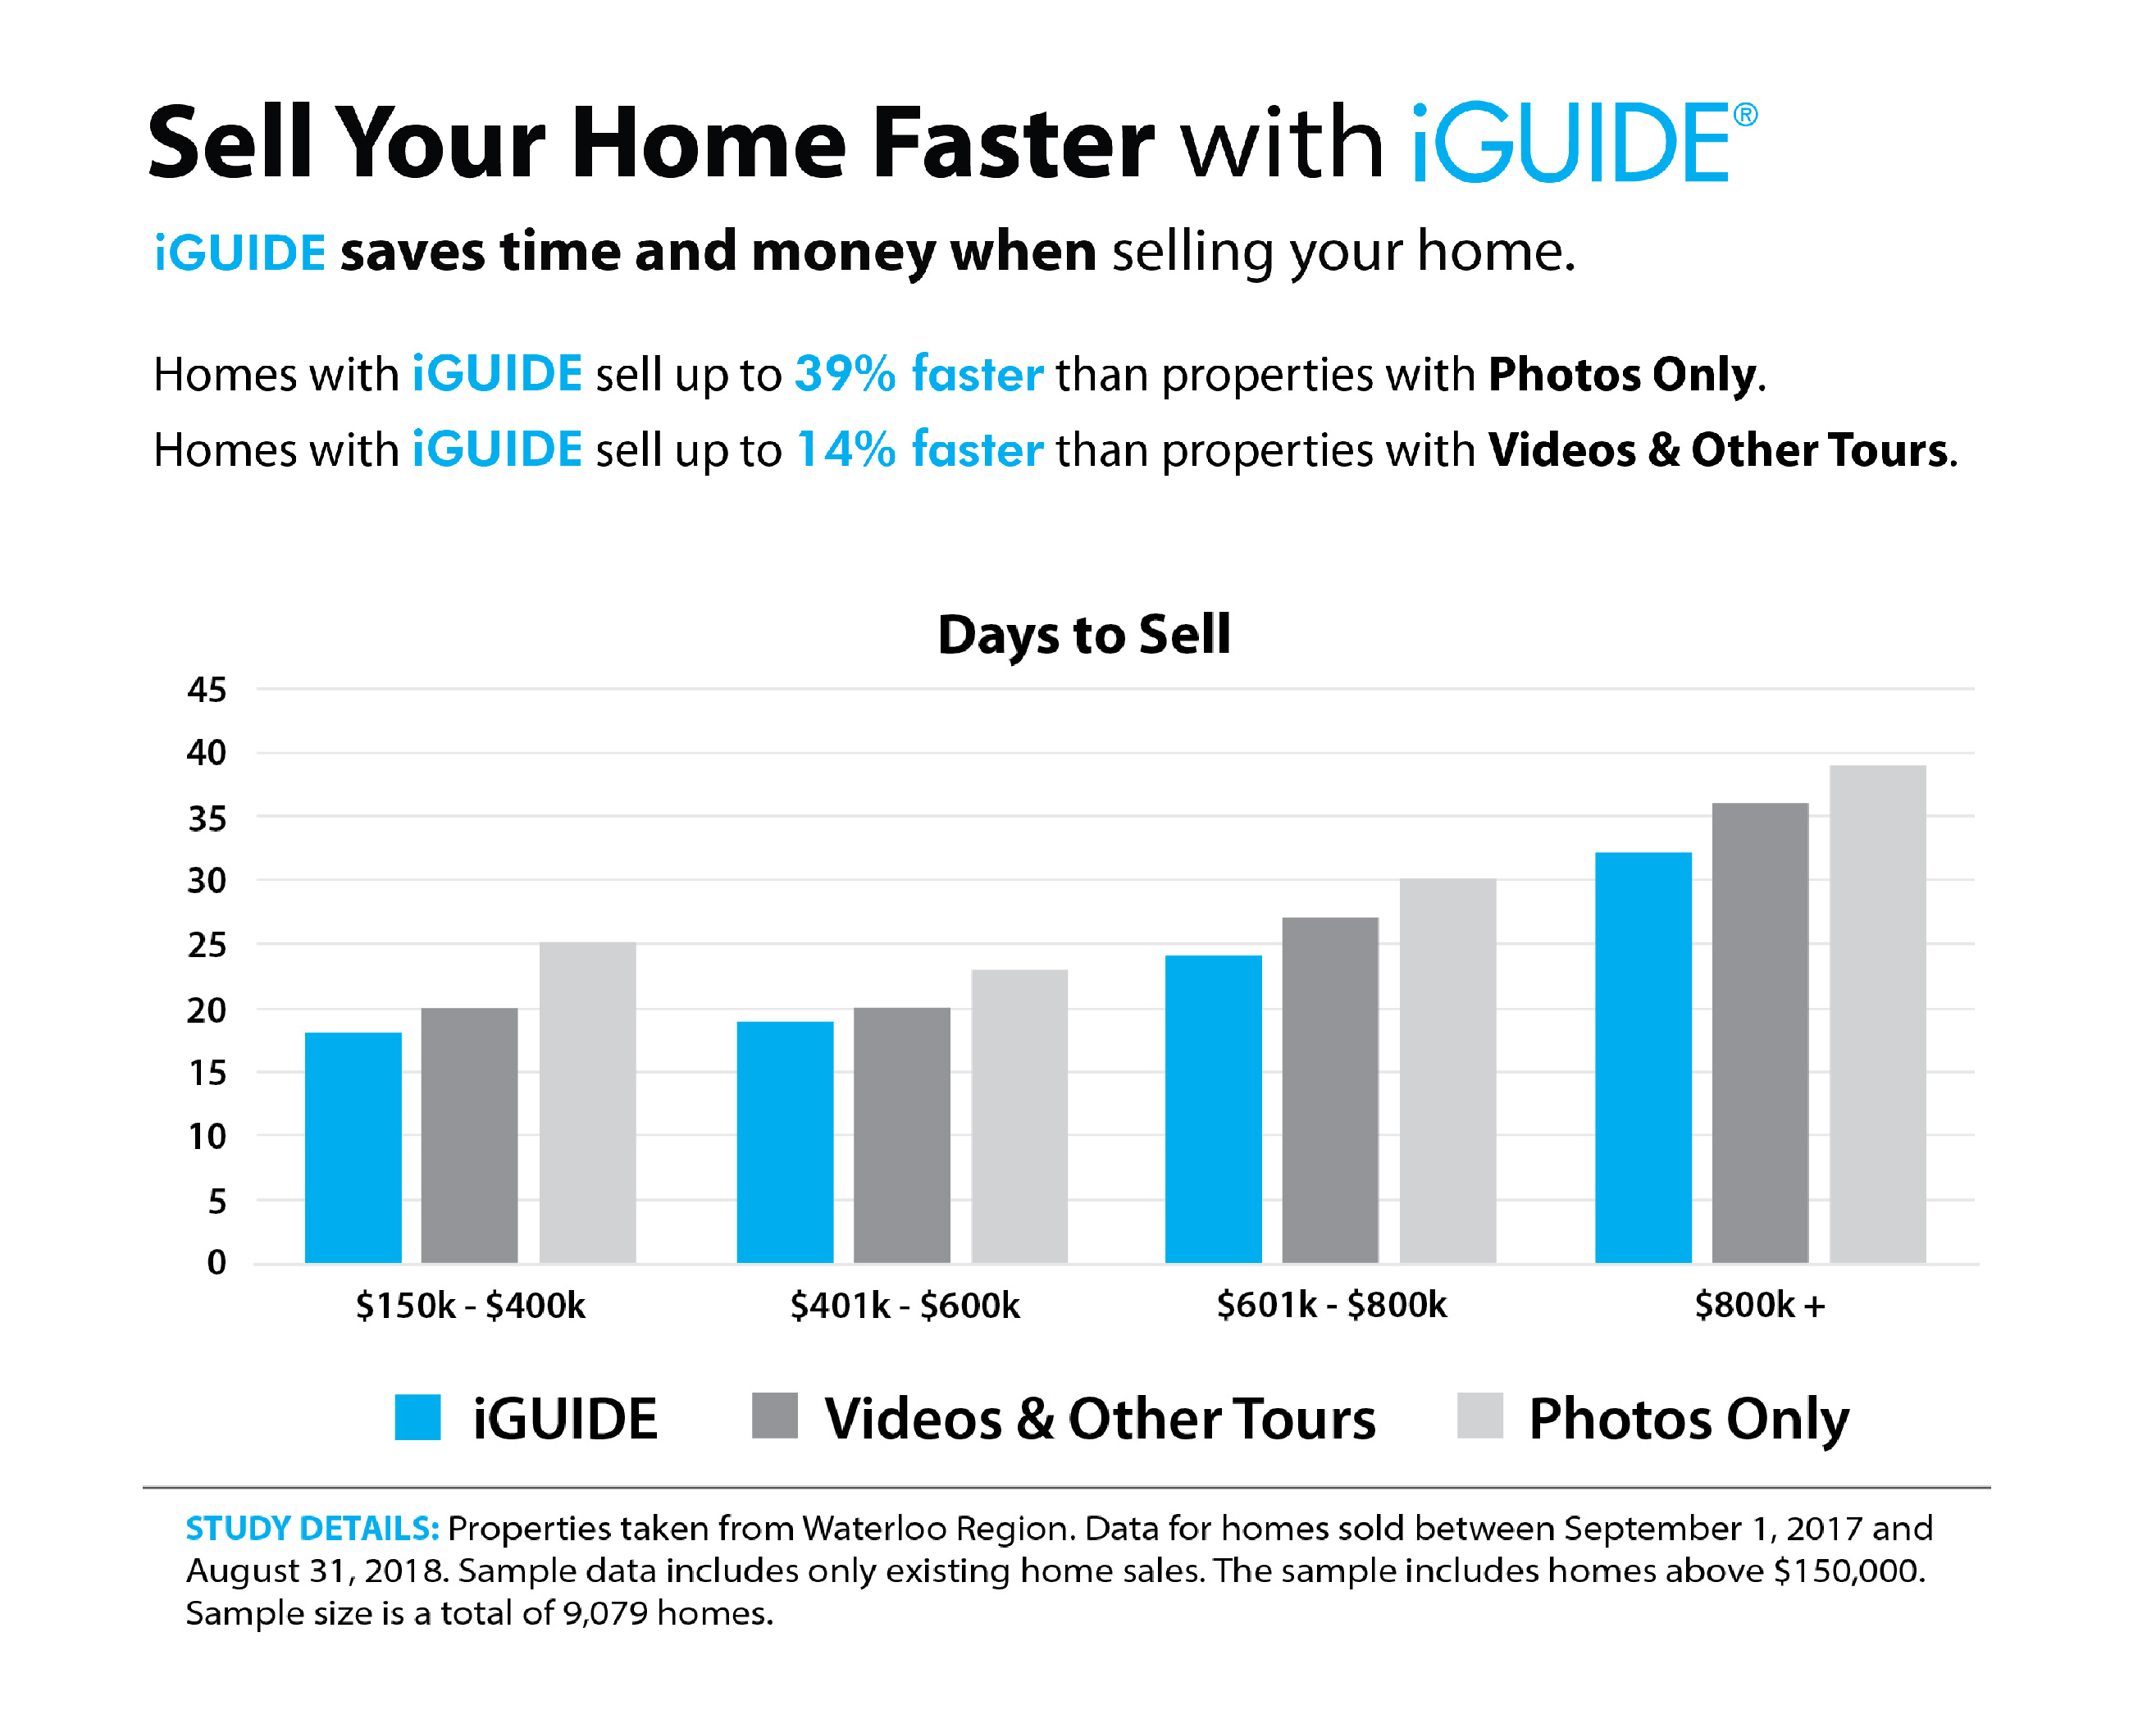 Sell your home faster with iGuide in Raleigh, Durham, Charlotte, Greensboro, and Winston-Salem North Carolina.